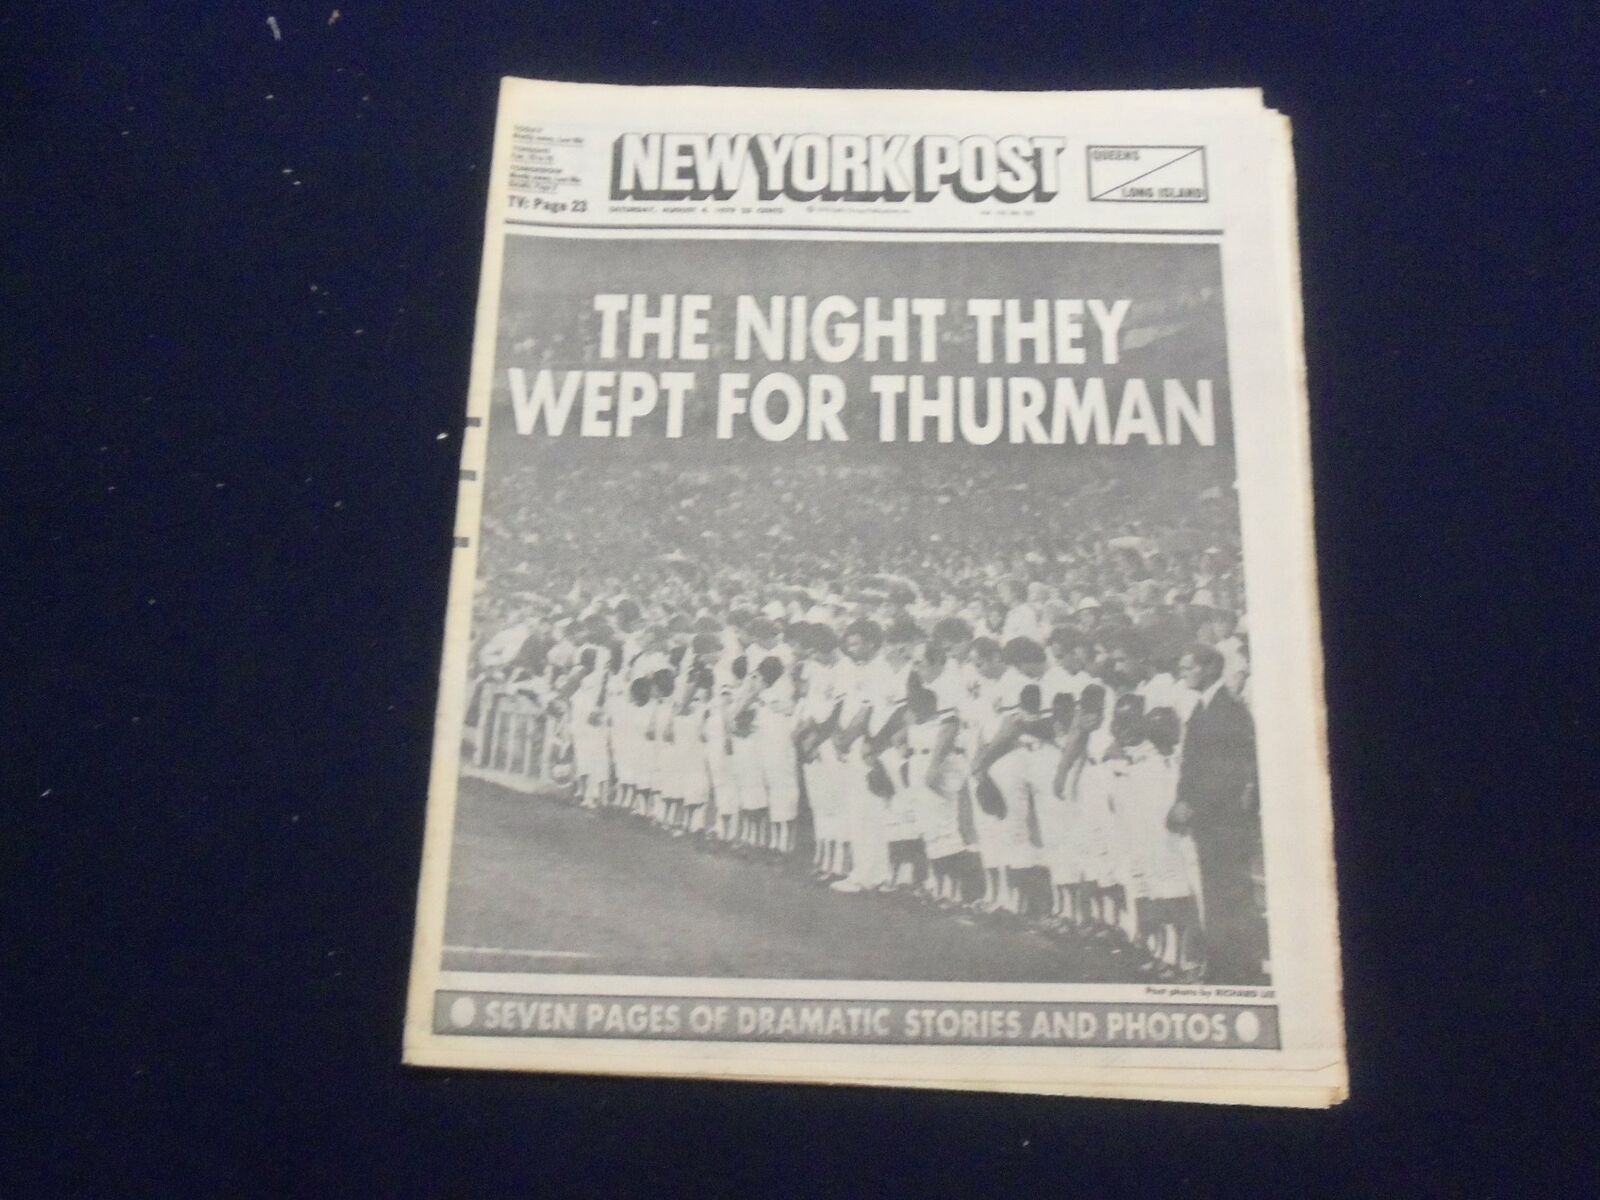 1979 AUGUST 4 NEW YORK POST NEWSPAPER - THE NIGHT THEY WEPT FOR MUNSON - NP 5180